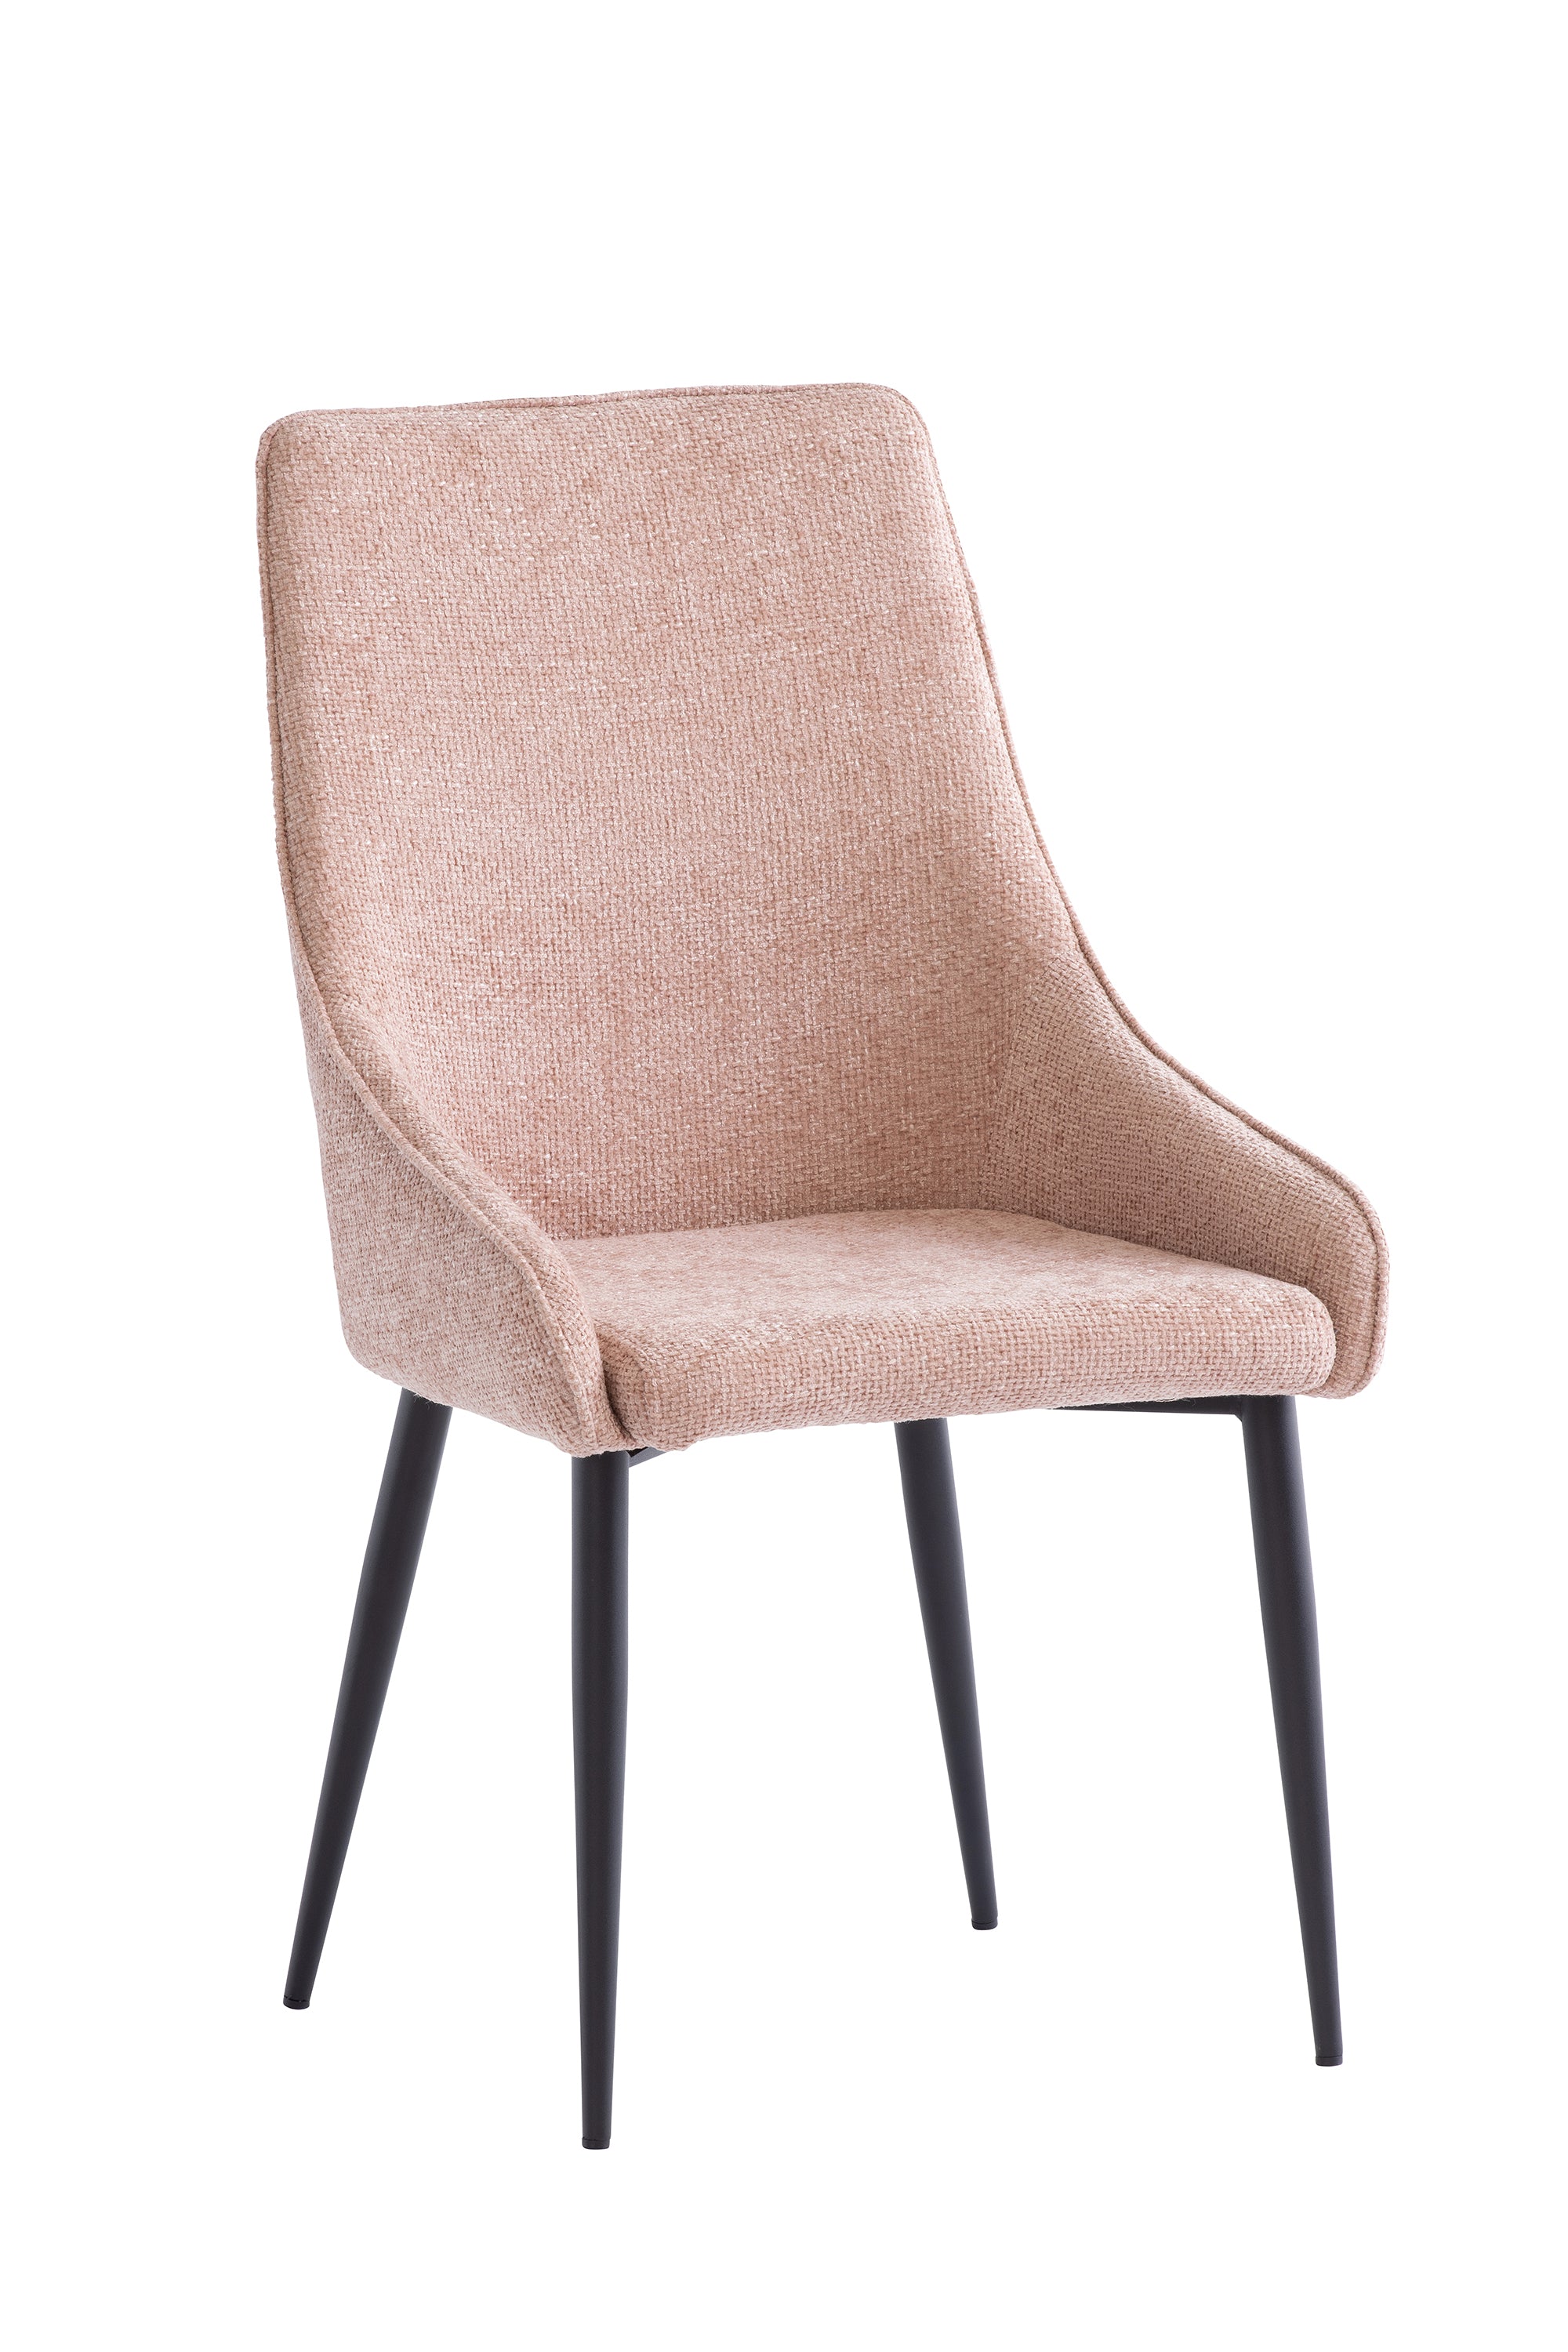 upholstered dining chairs